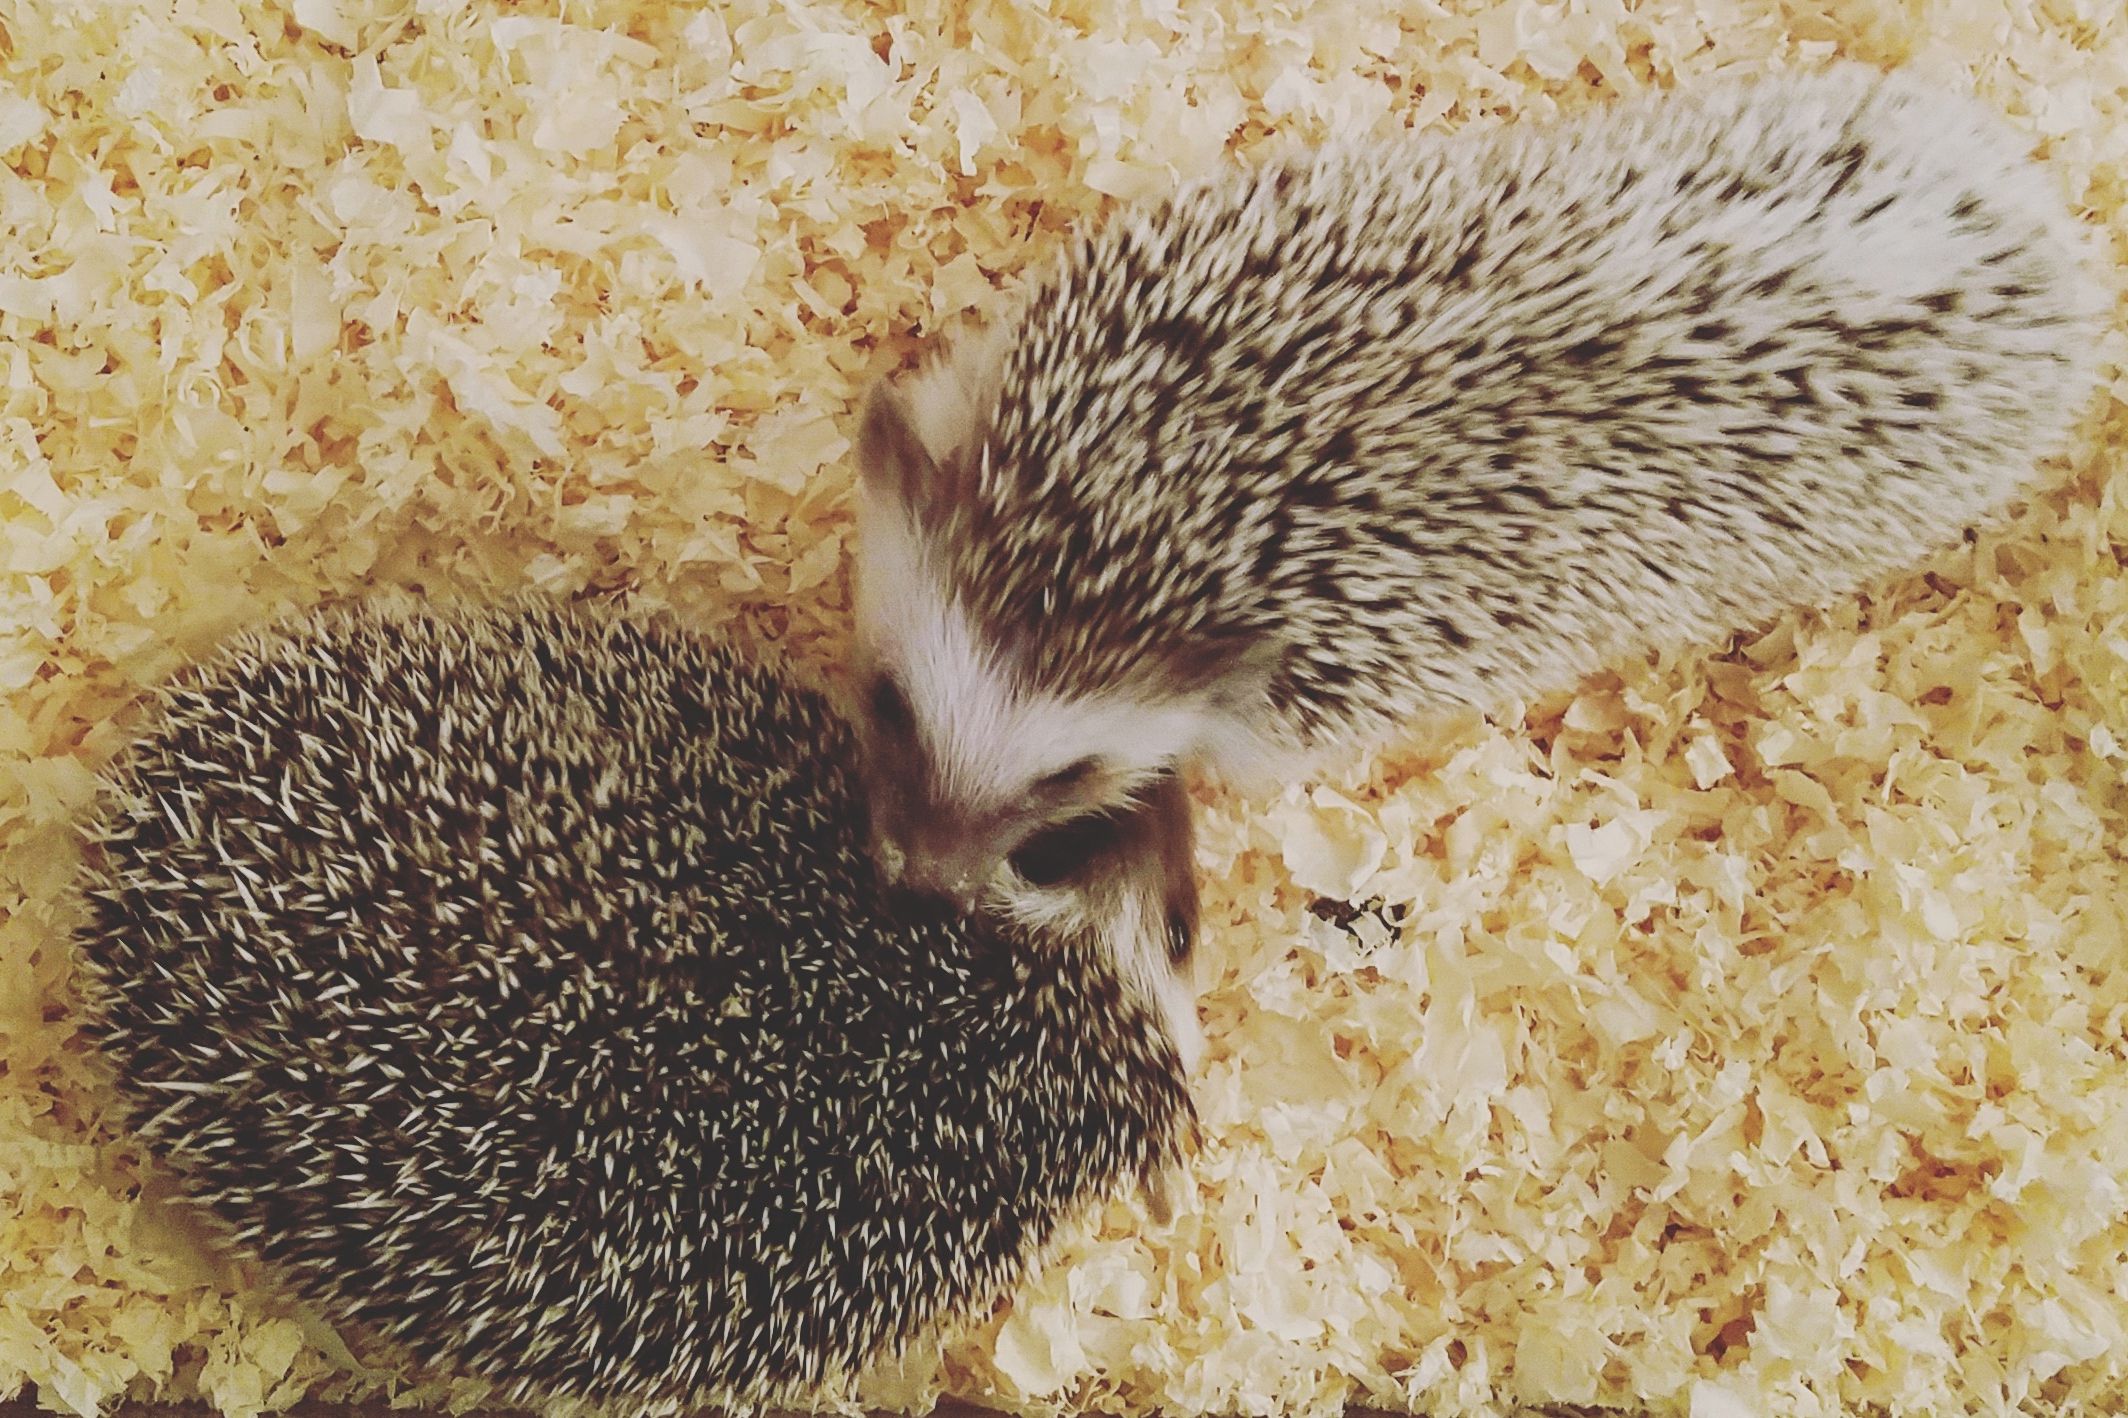 What type of bedding or litter material is best for hedgehogs?